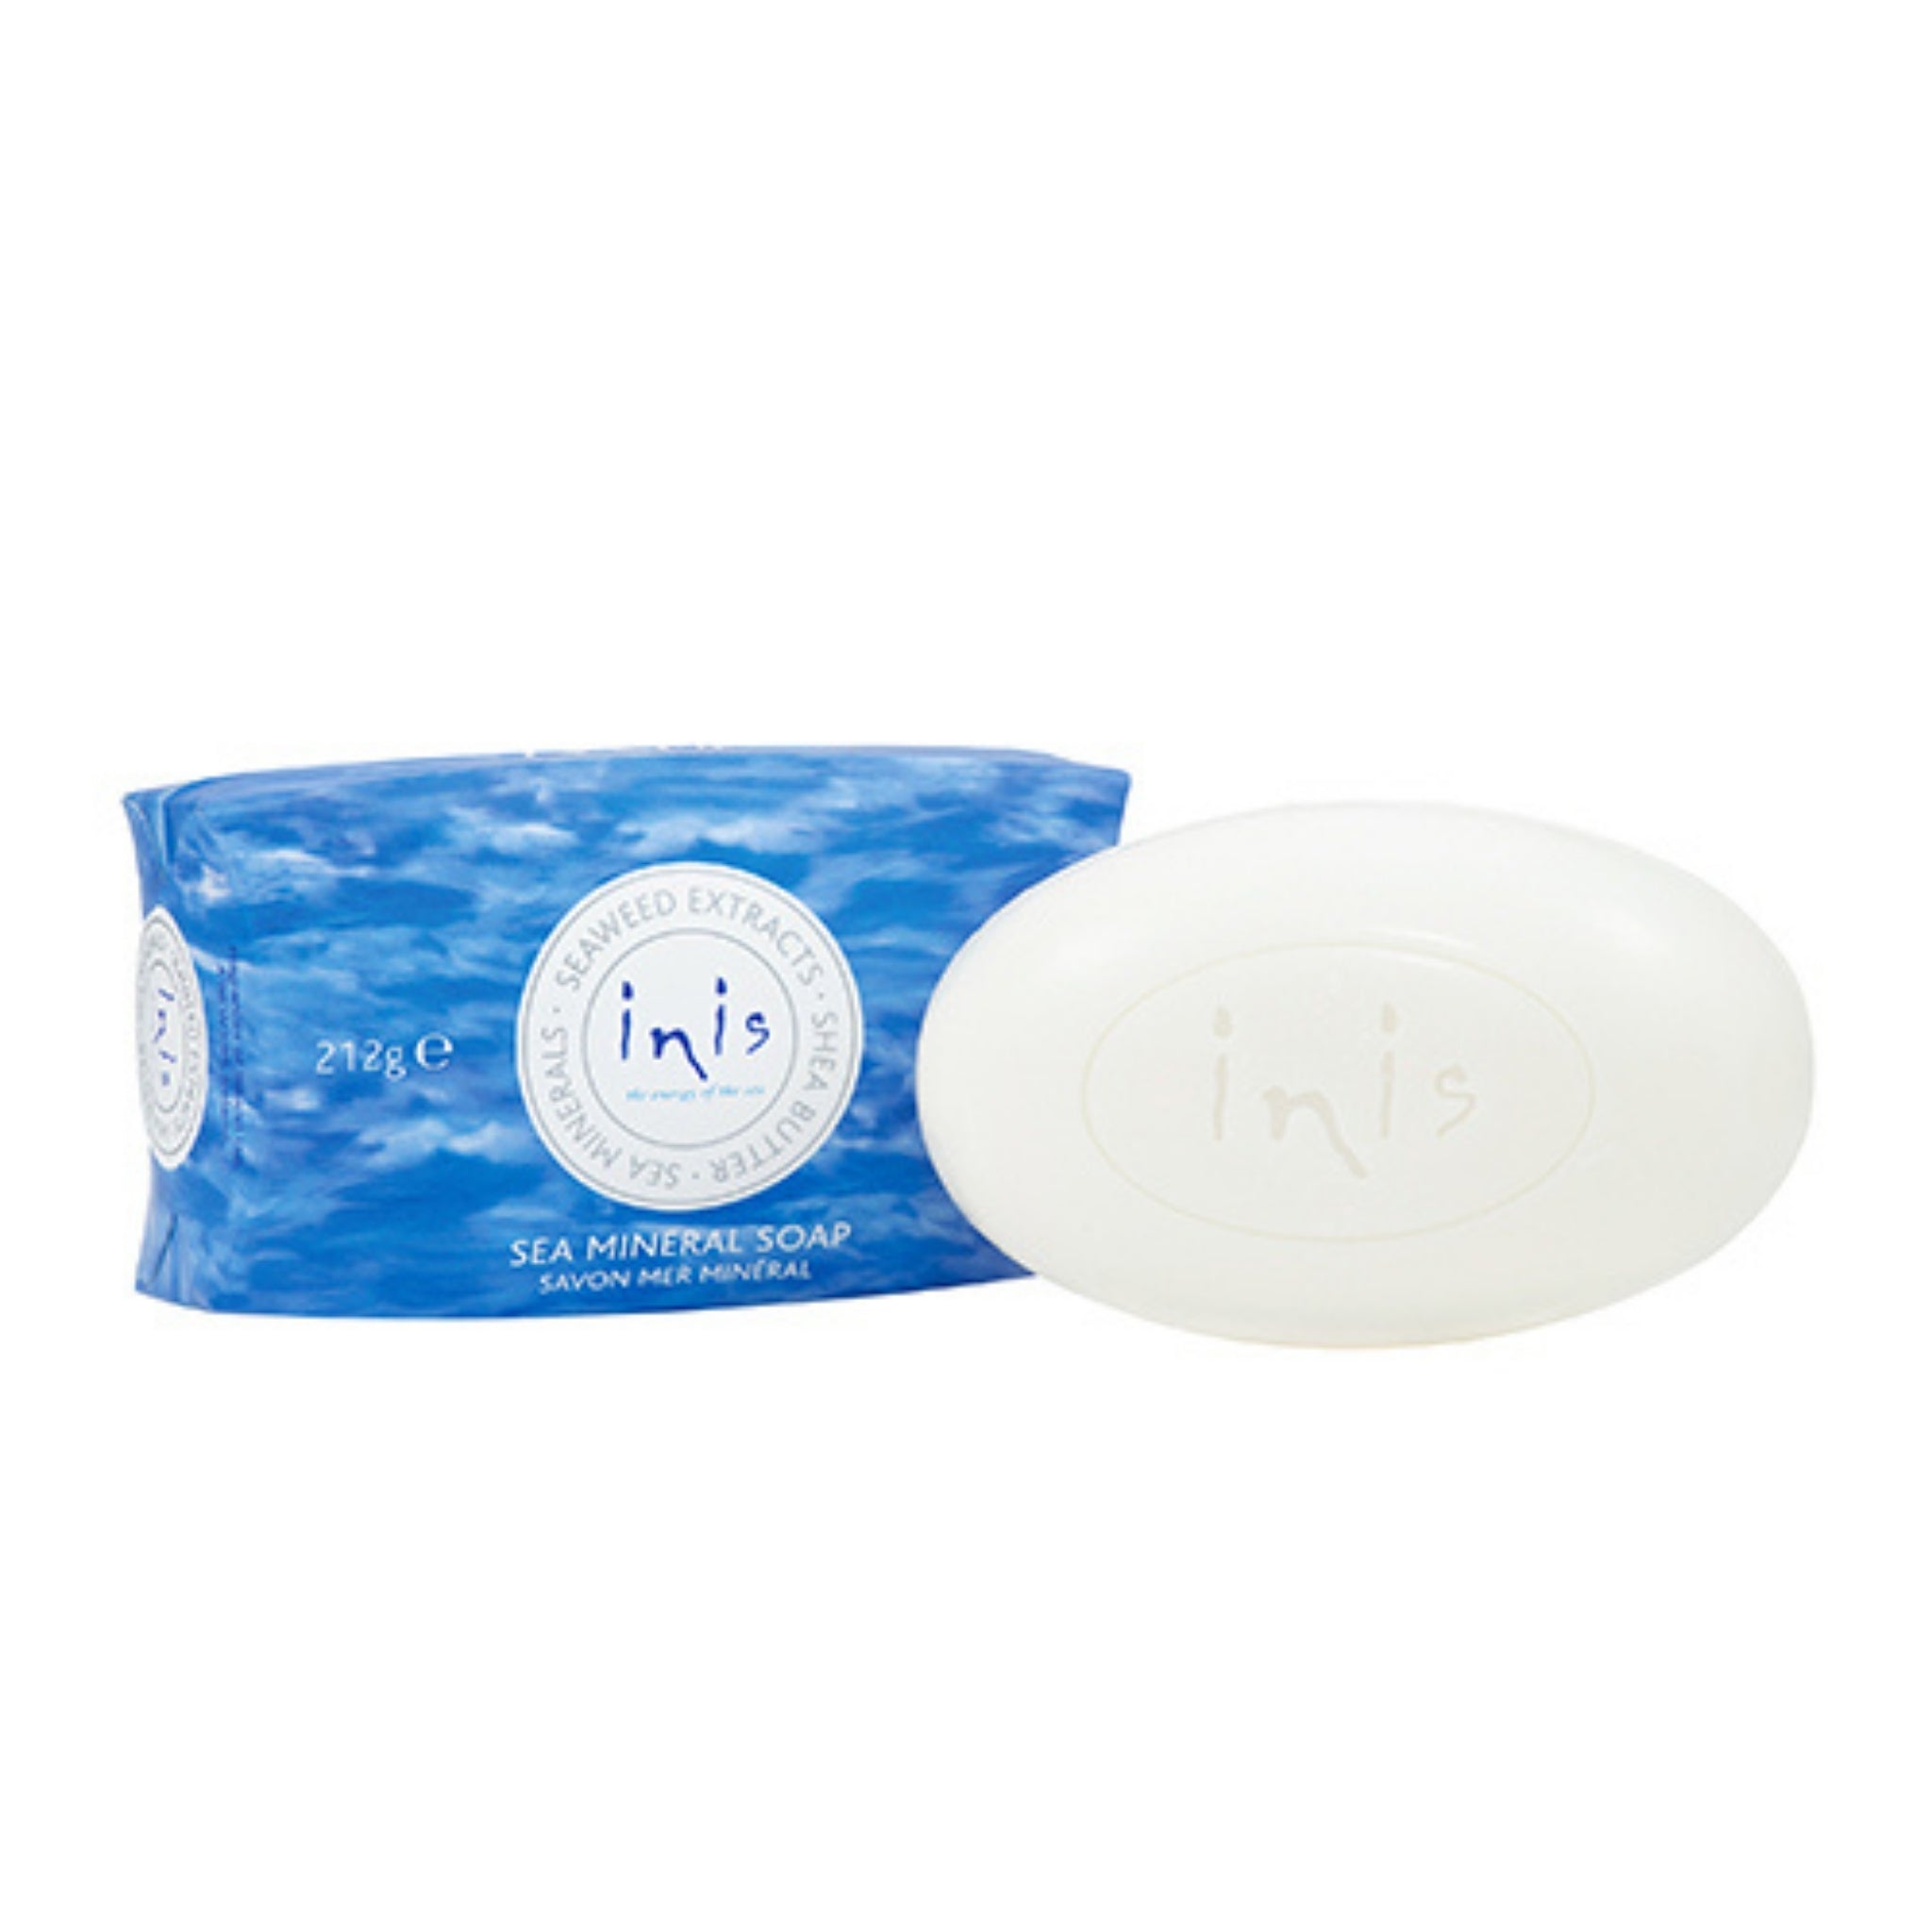 Inis Large Mineral Soap